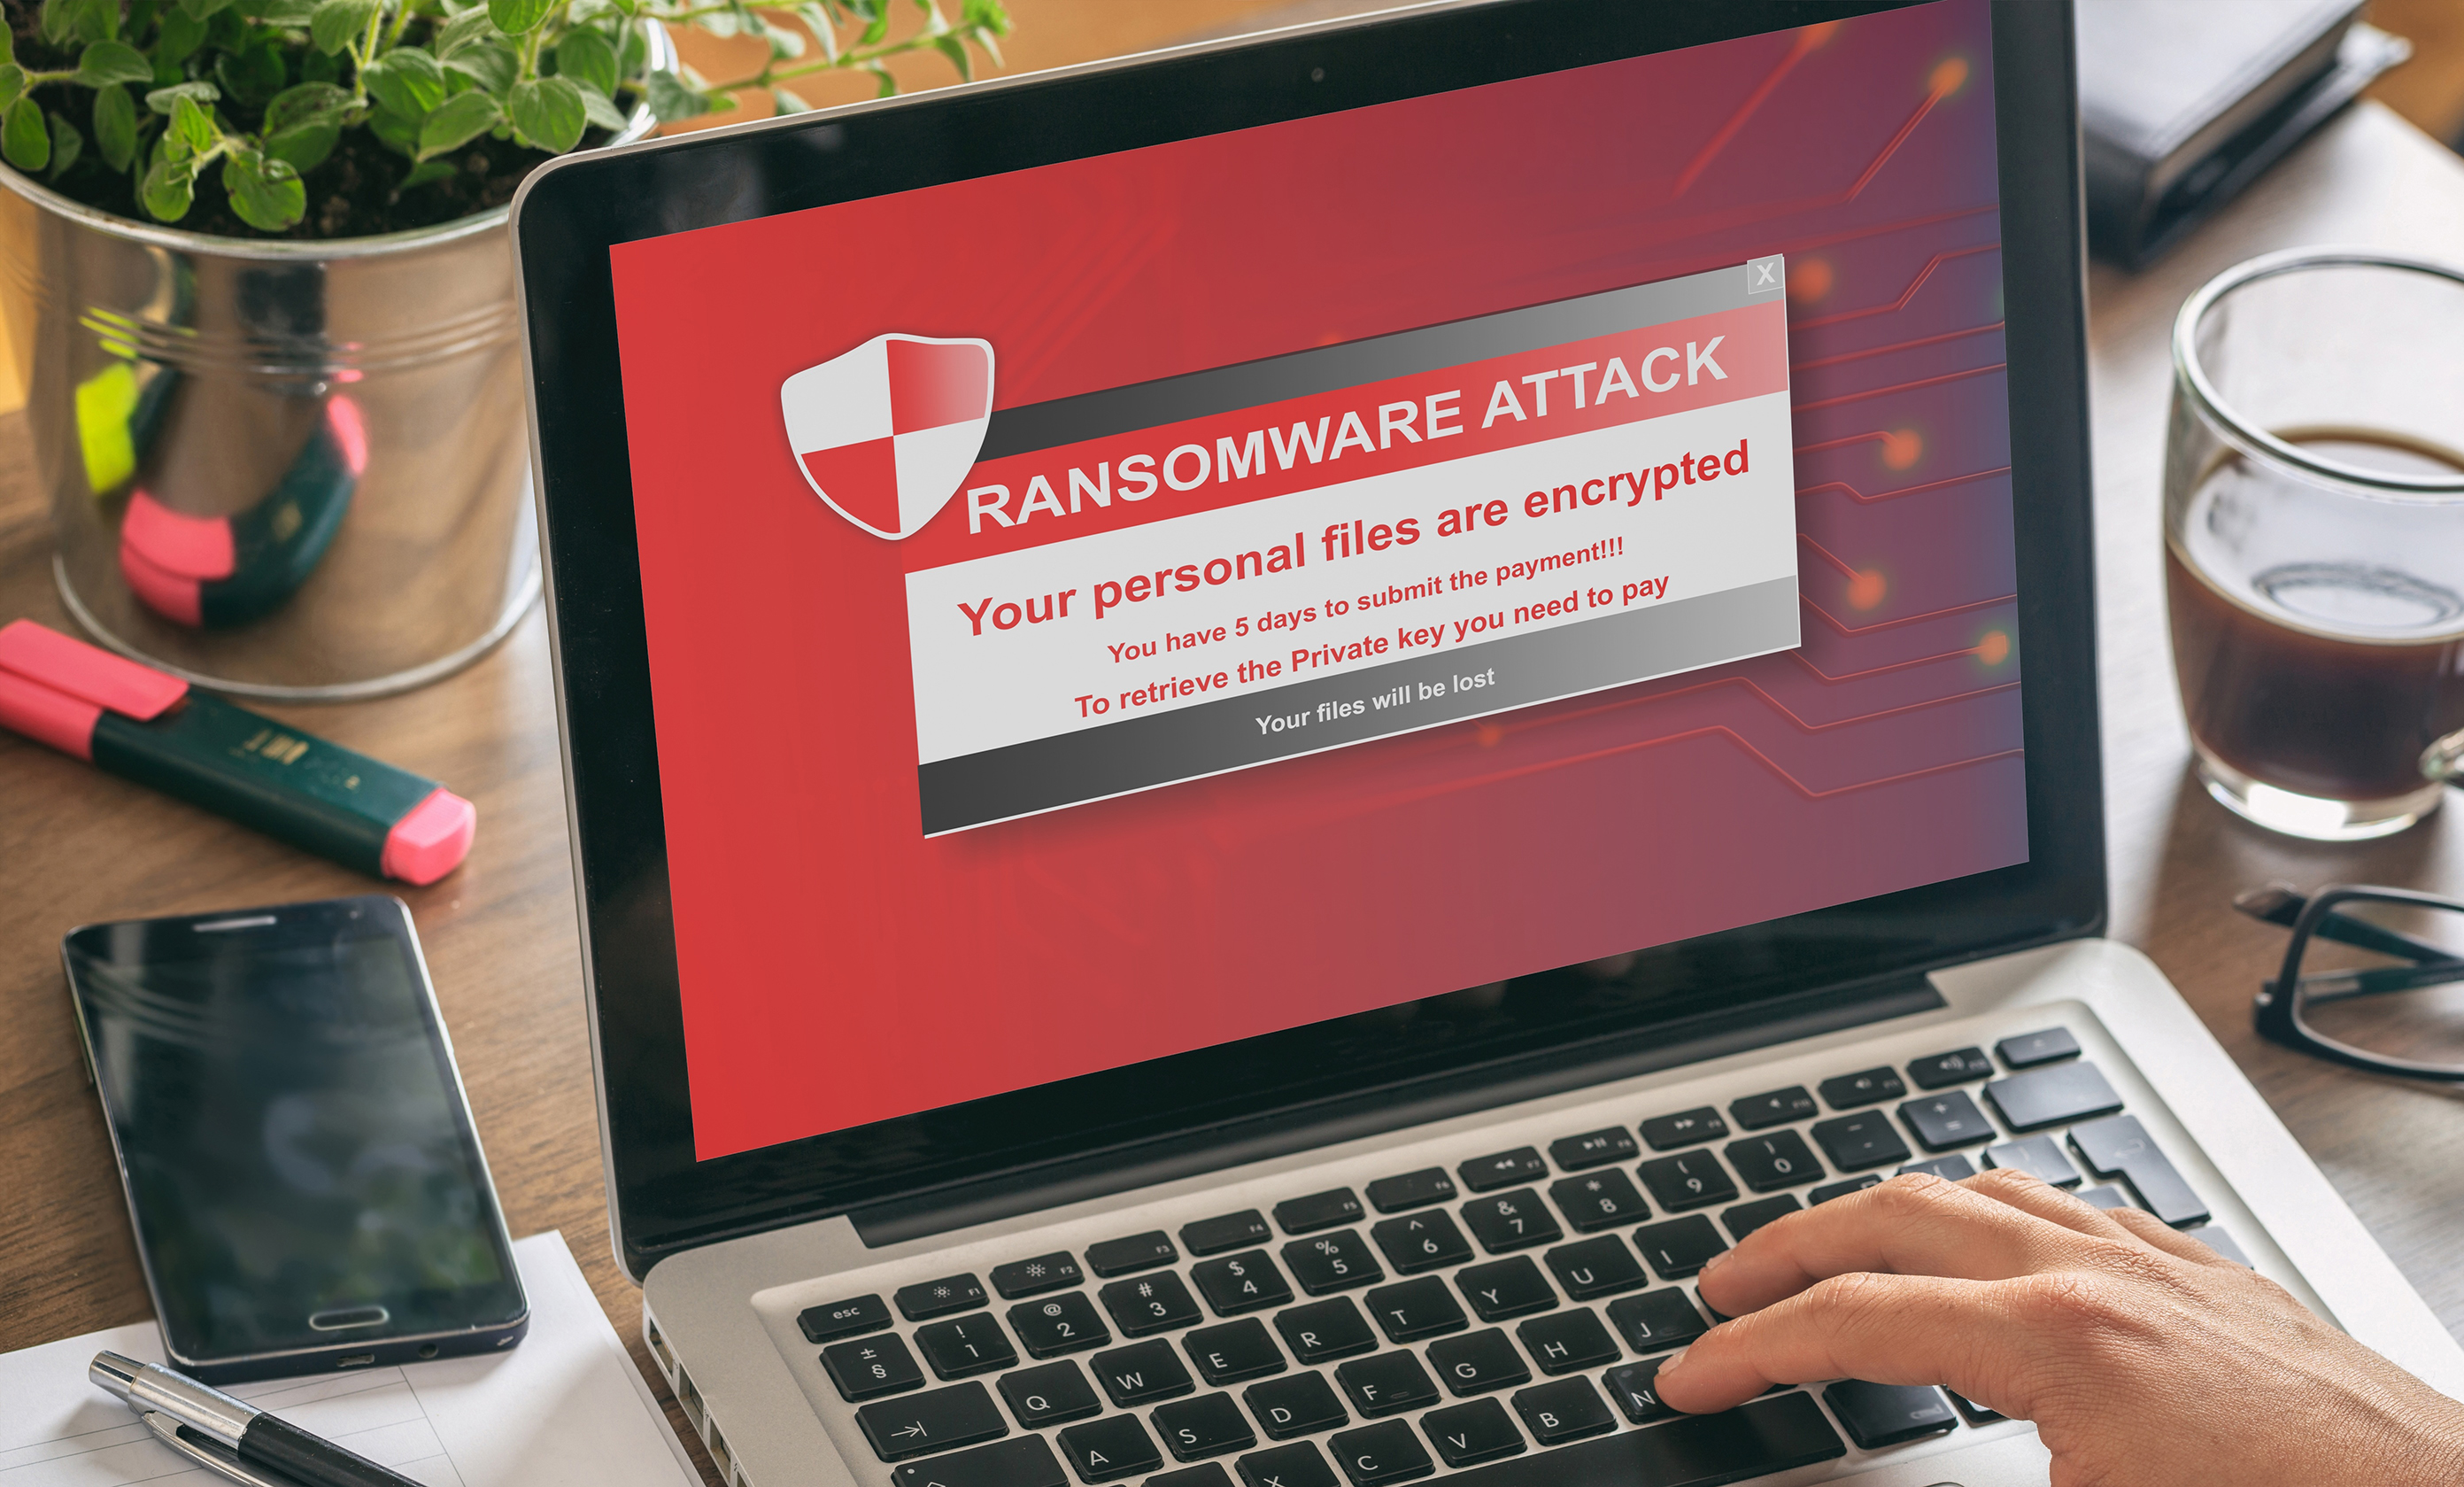 ransomware attack notification appearing on work laptop screen